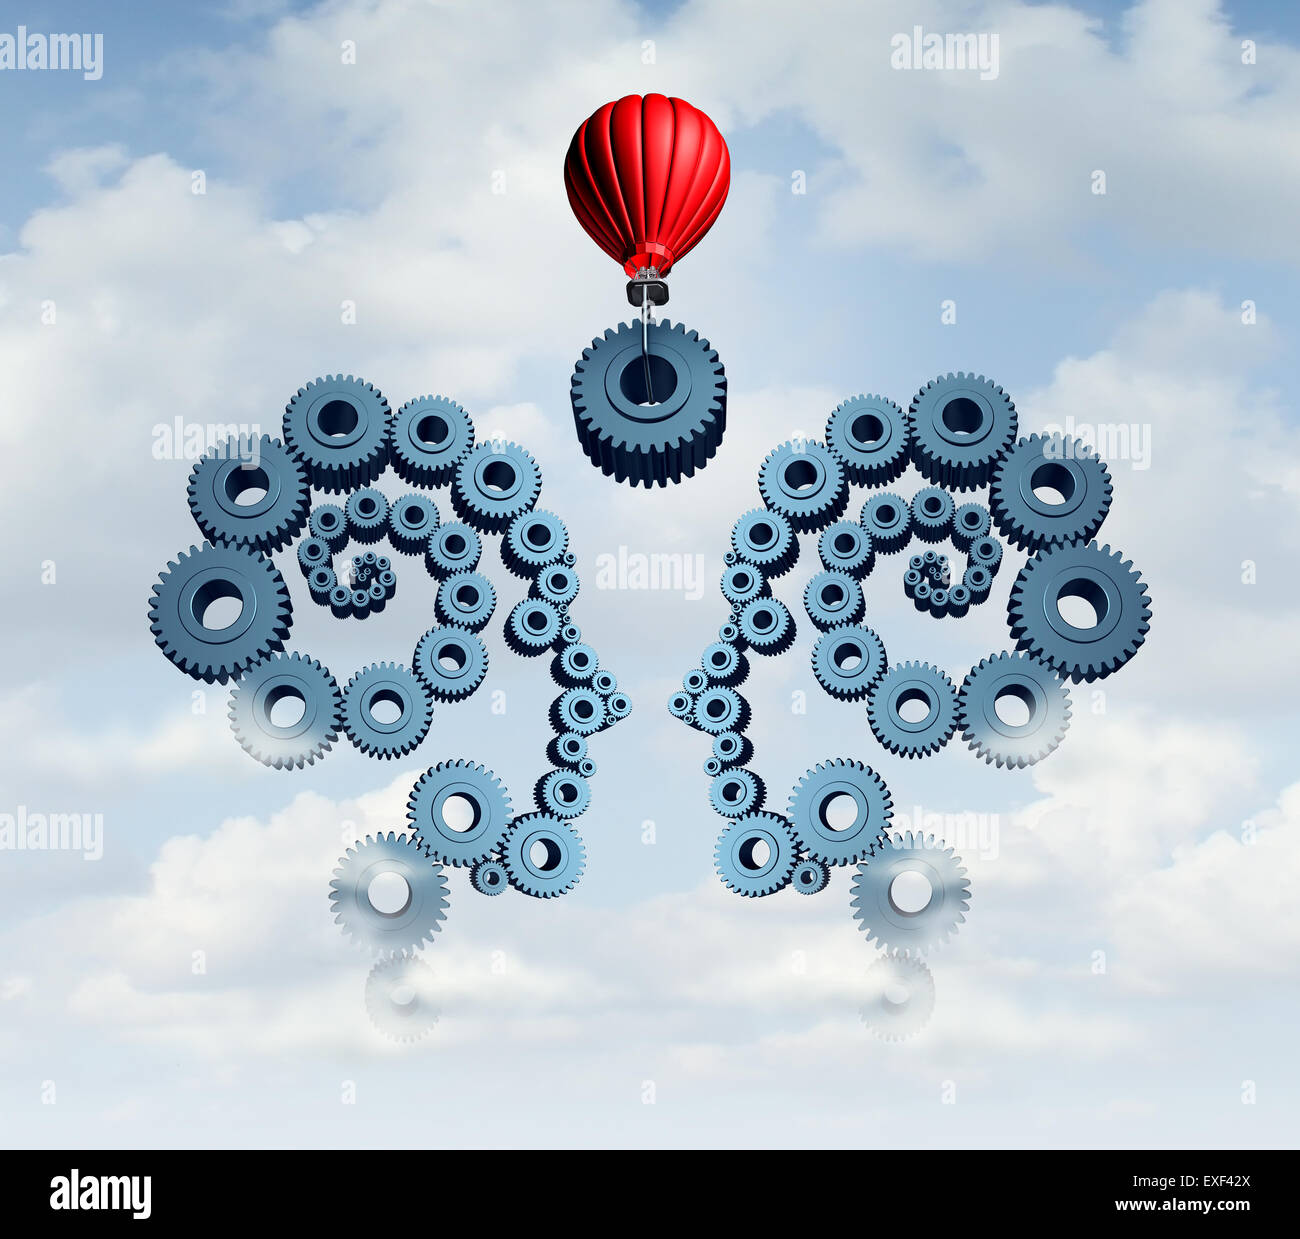 Constructing a business partnership concept with gears connected together shaped as a human head team with a red balloon placing a key cog in the center to connect the partners. Stock Photo